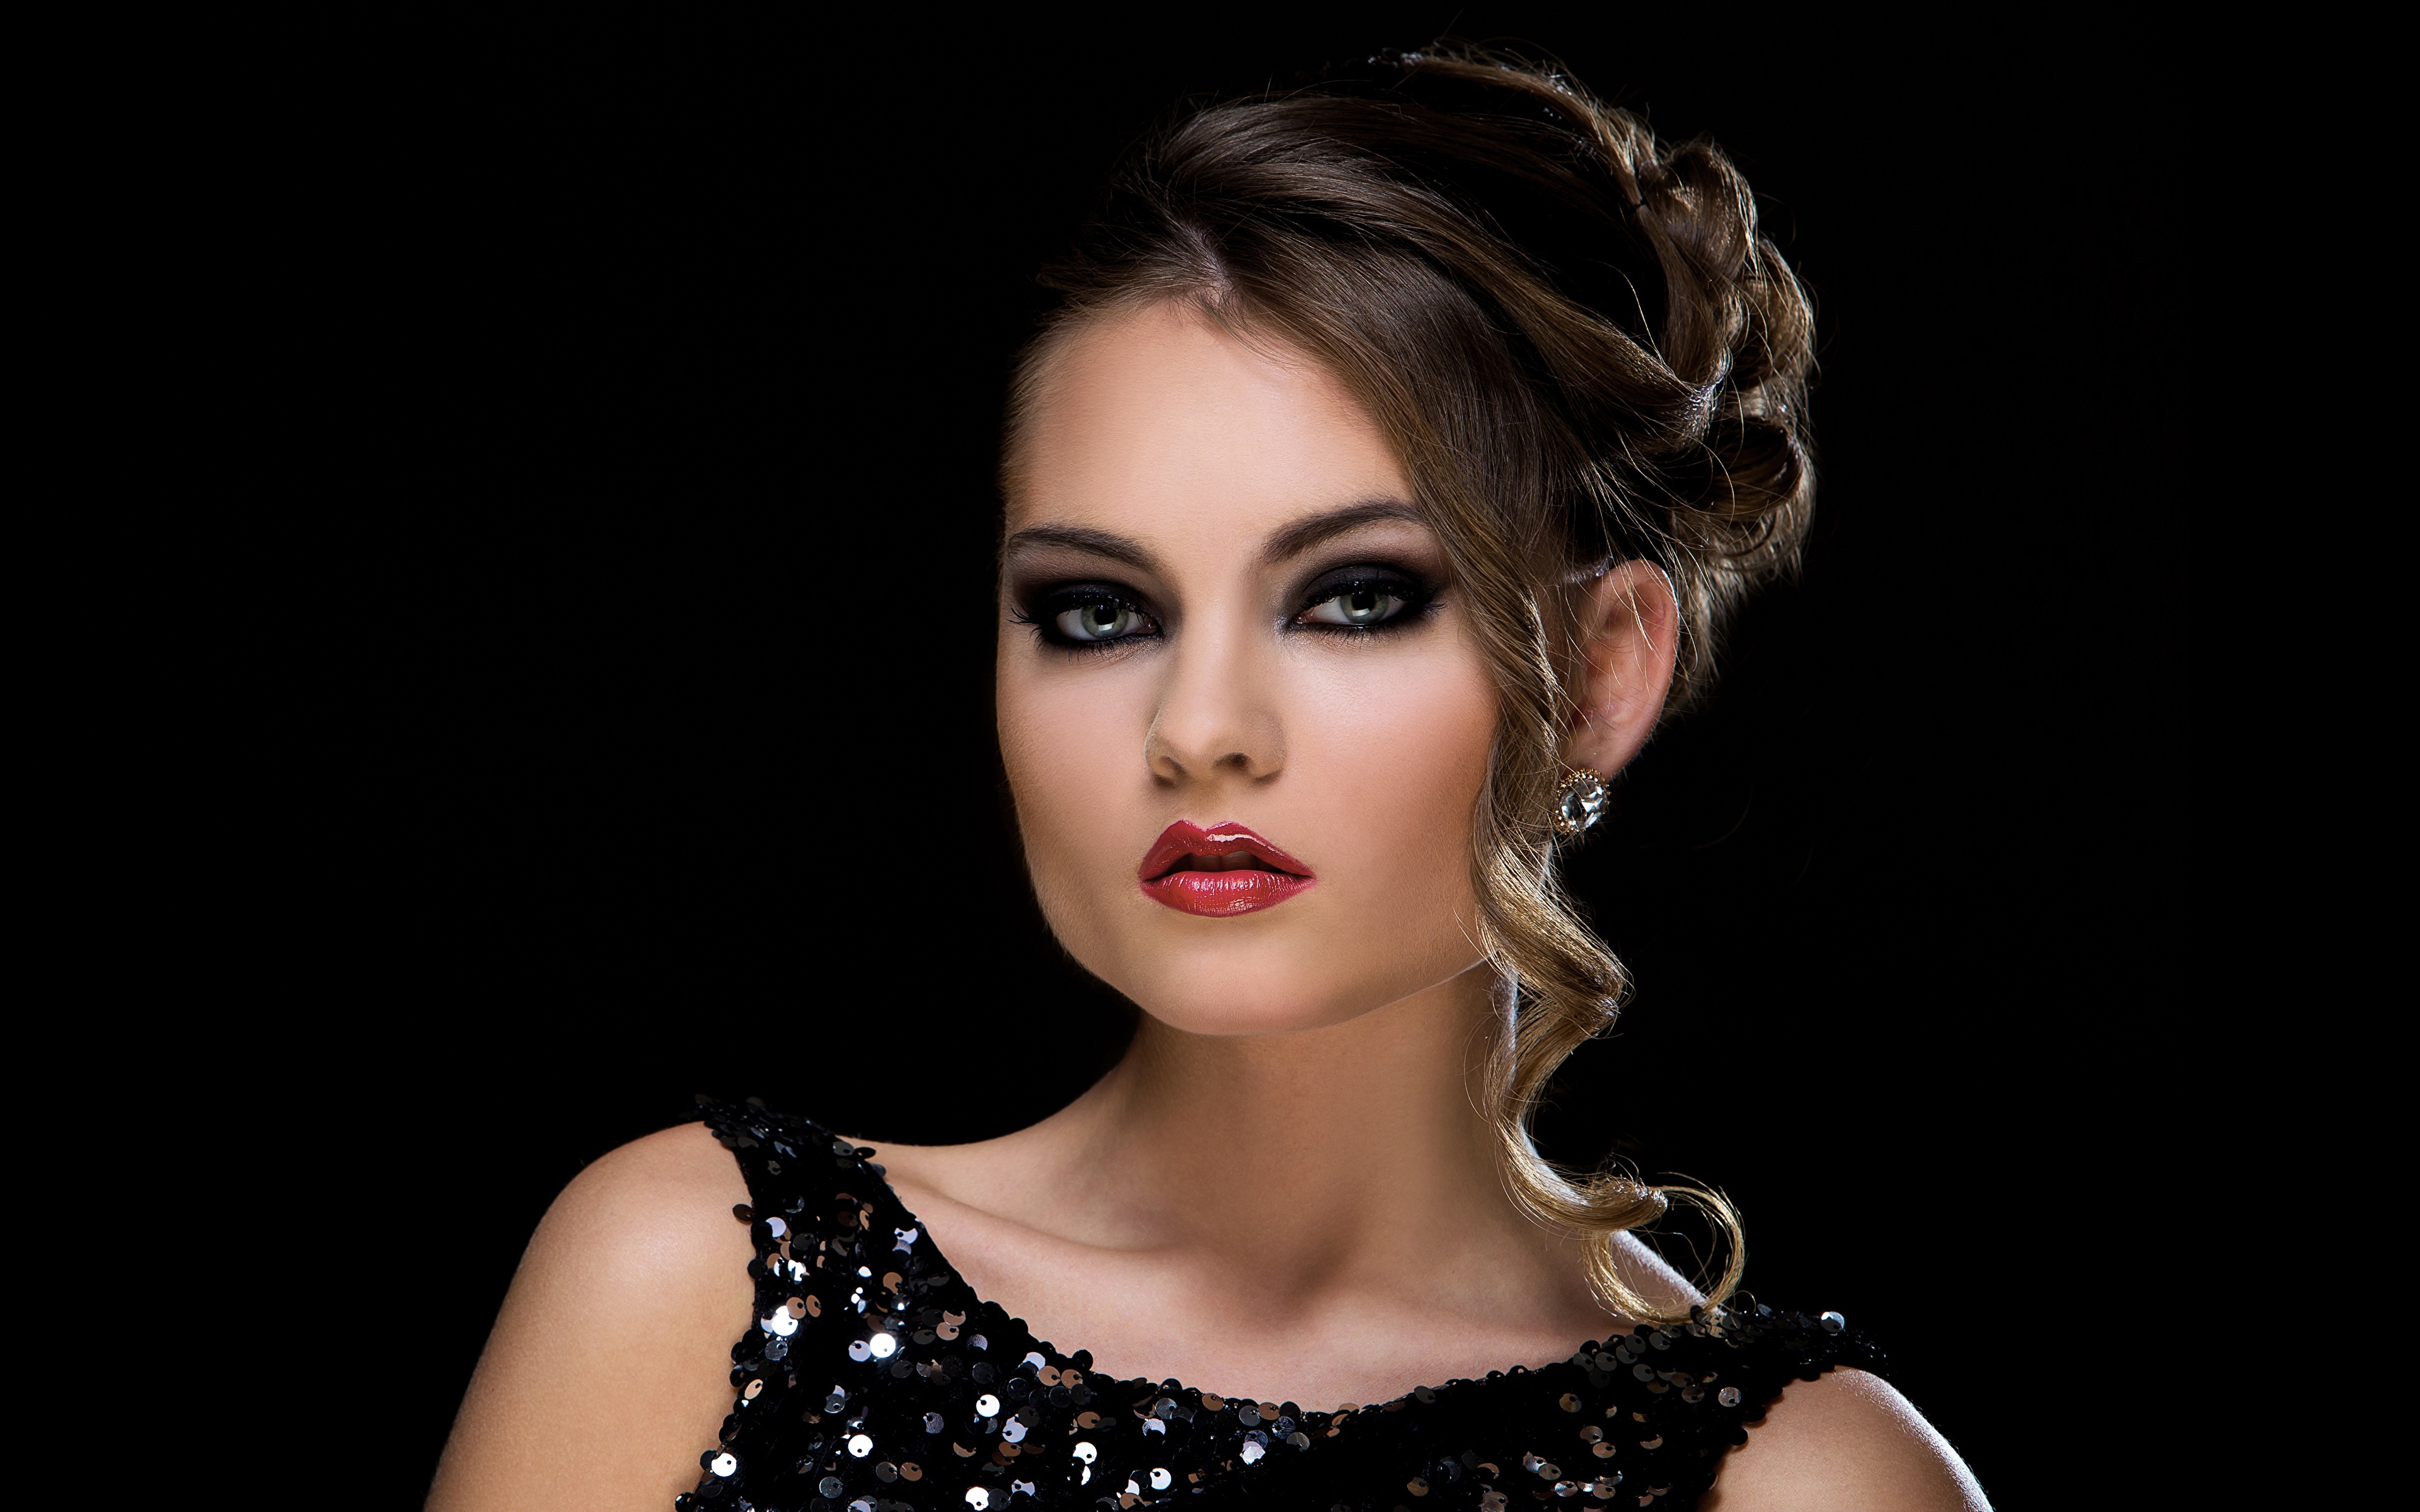 Photo Modelling Makeup Hairstyle young woman Glance Black 3840x2400